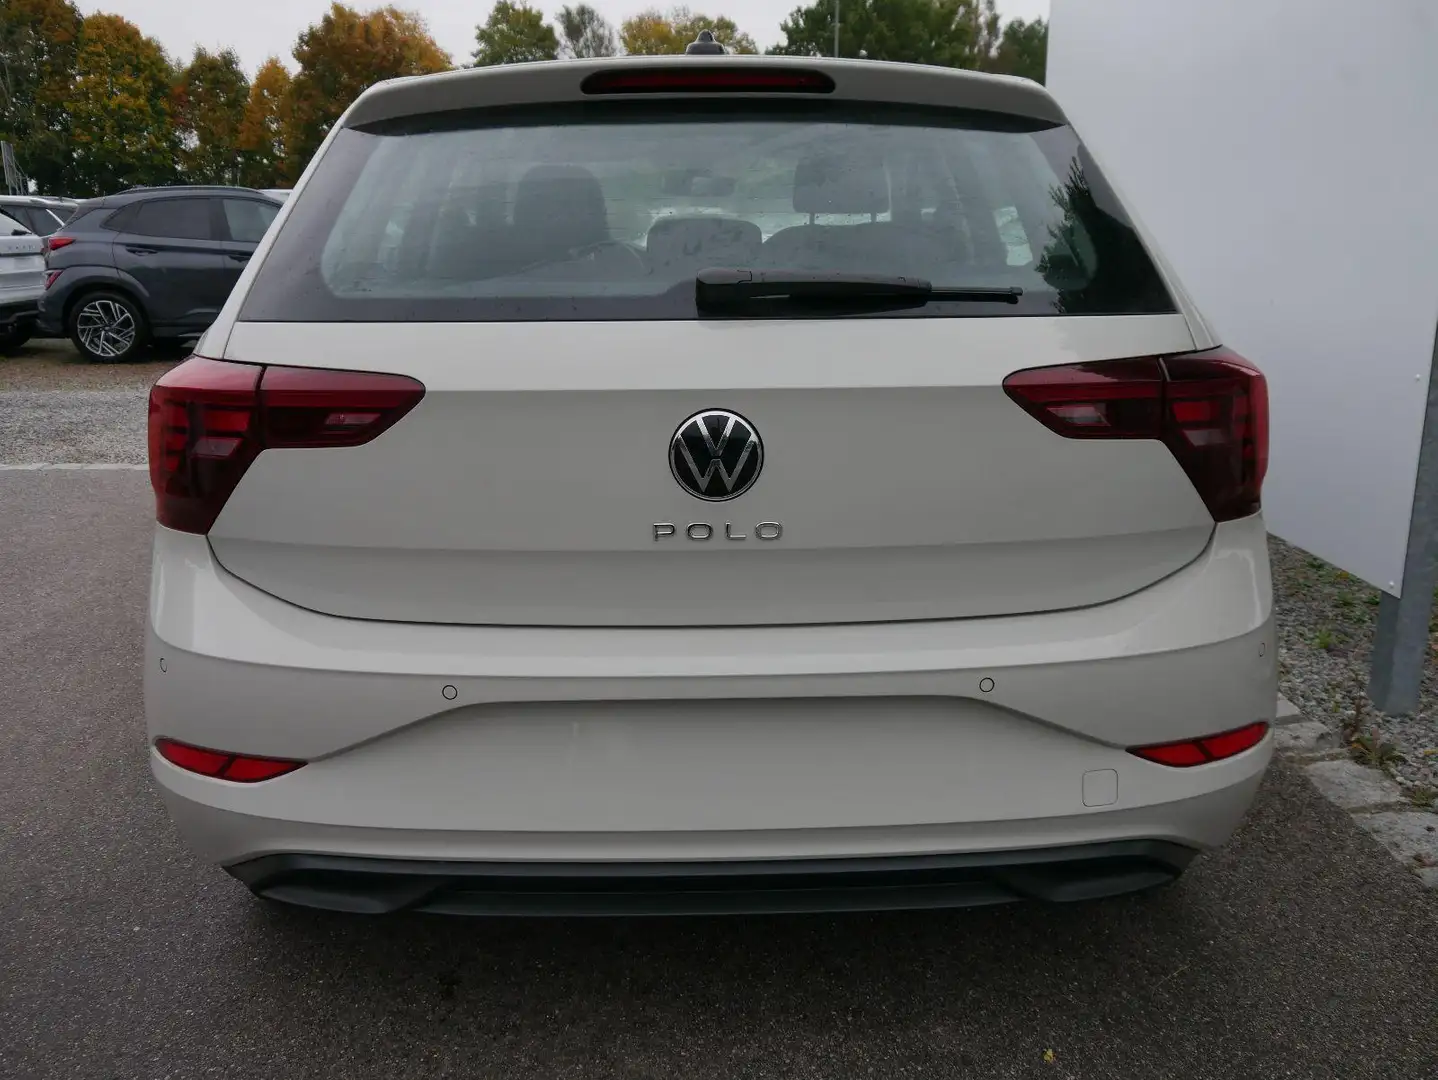 Volkswagen Polo LIFE 1.0 TSI DSG * APP-CONNECT PDC SHZ LED DAB ... Gris - 2